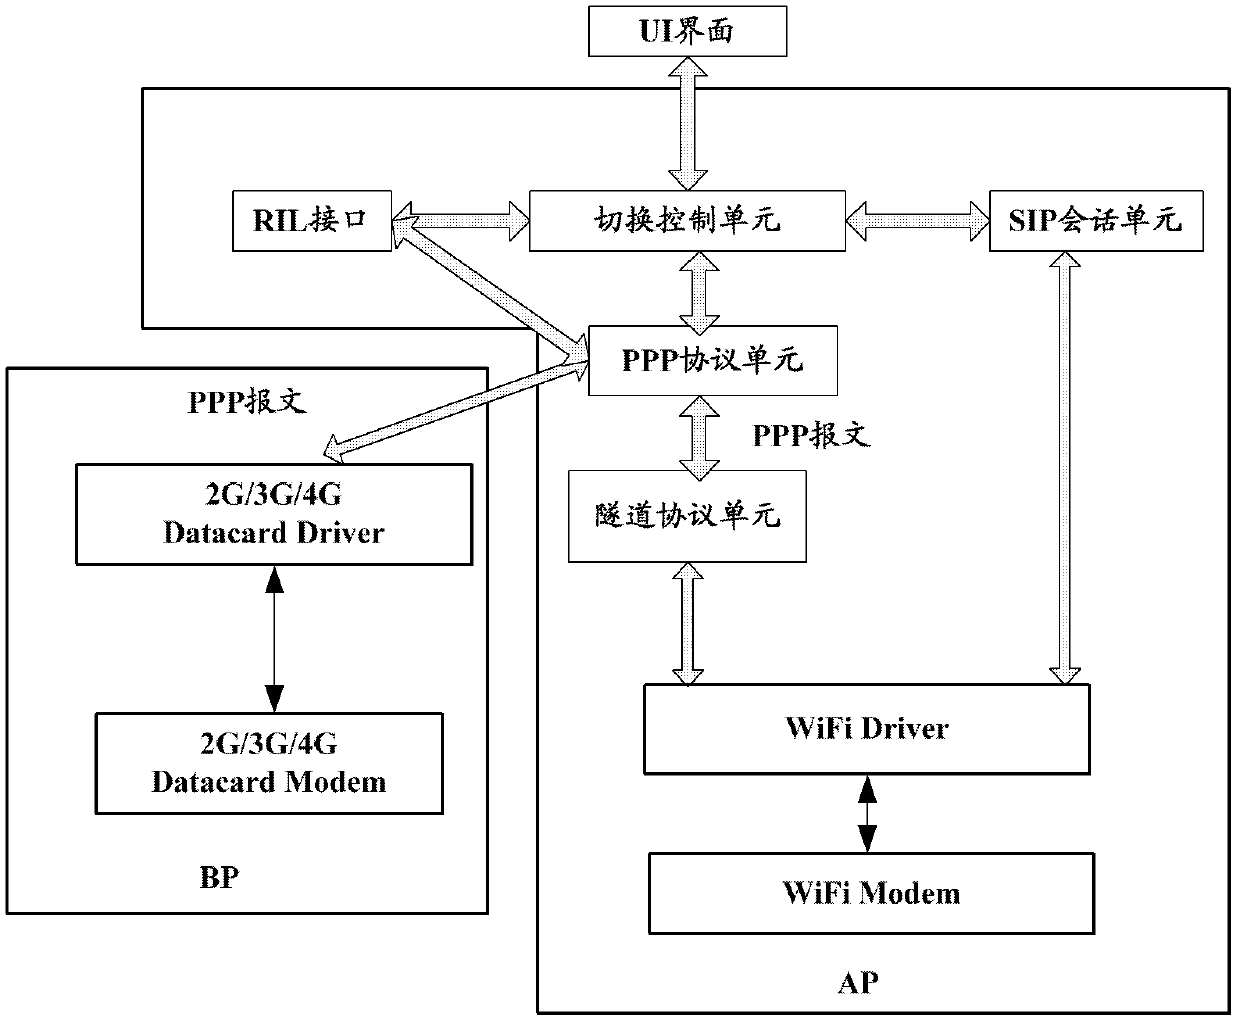 Different-network switching method and terminal based on AP (application processor) in Android system